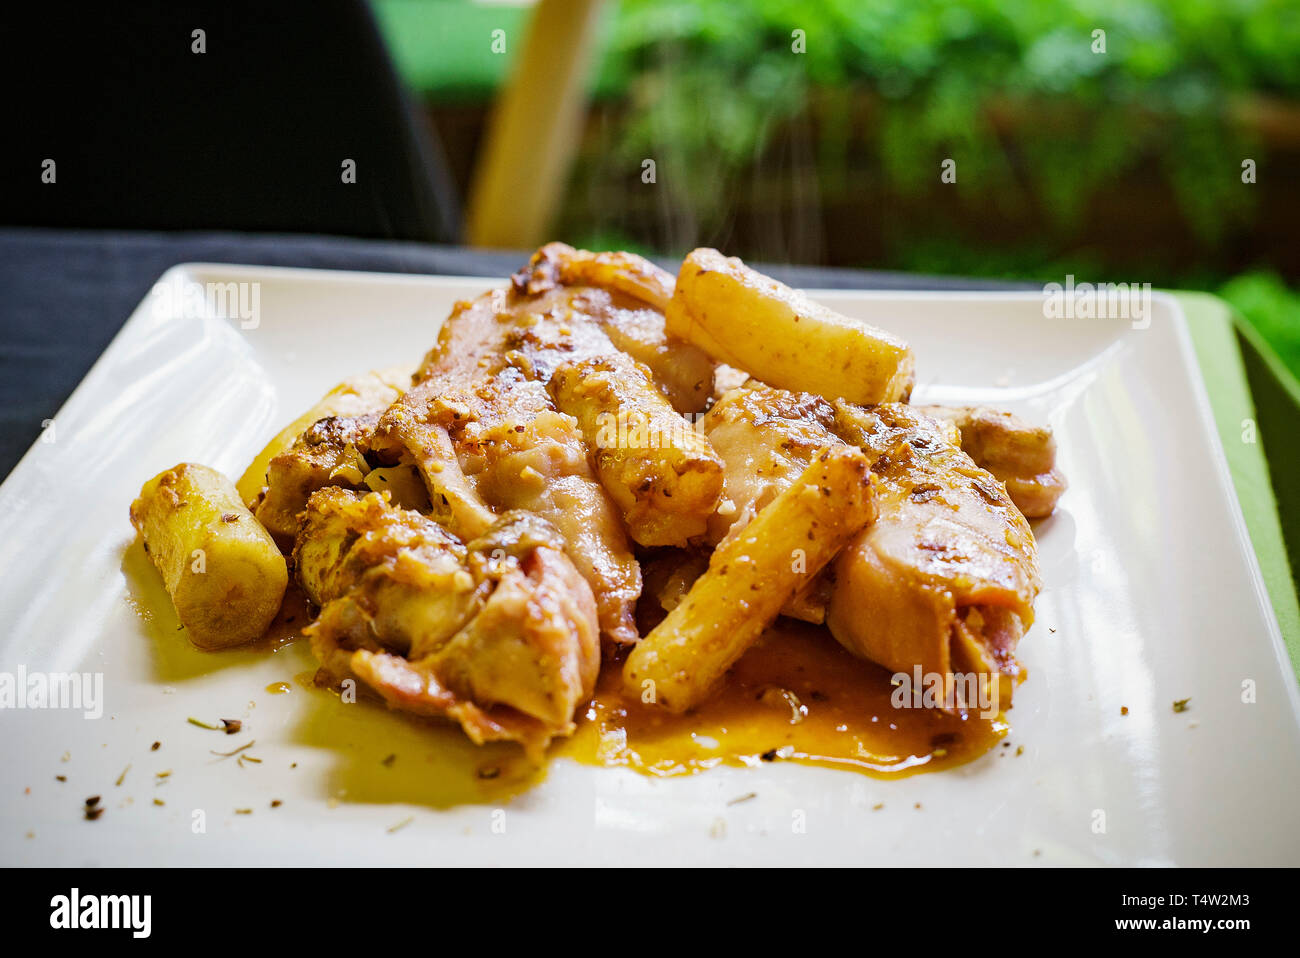 Pies de cerdo with salsafin(tuber sauce).pig trotters with salsafin. Pineda de Mar. Catalunya. Spain Stock Photo